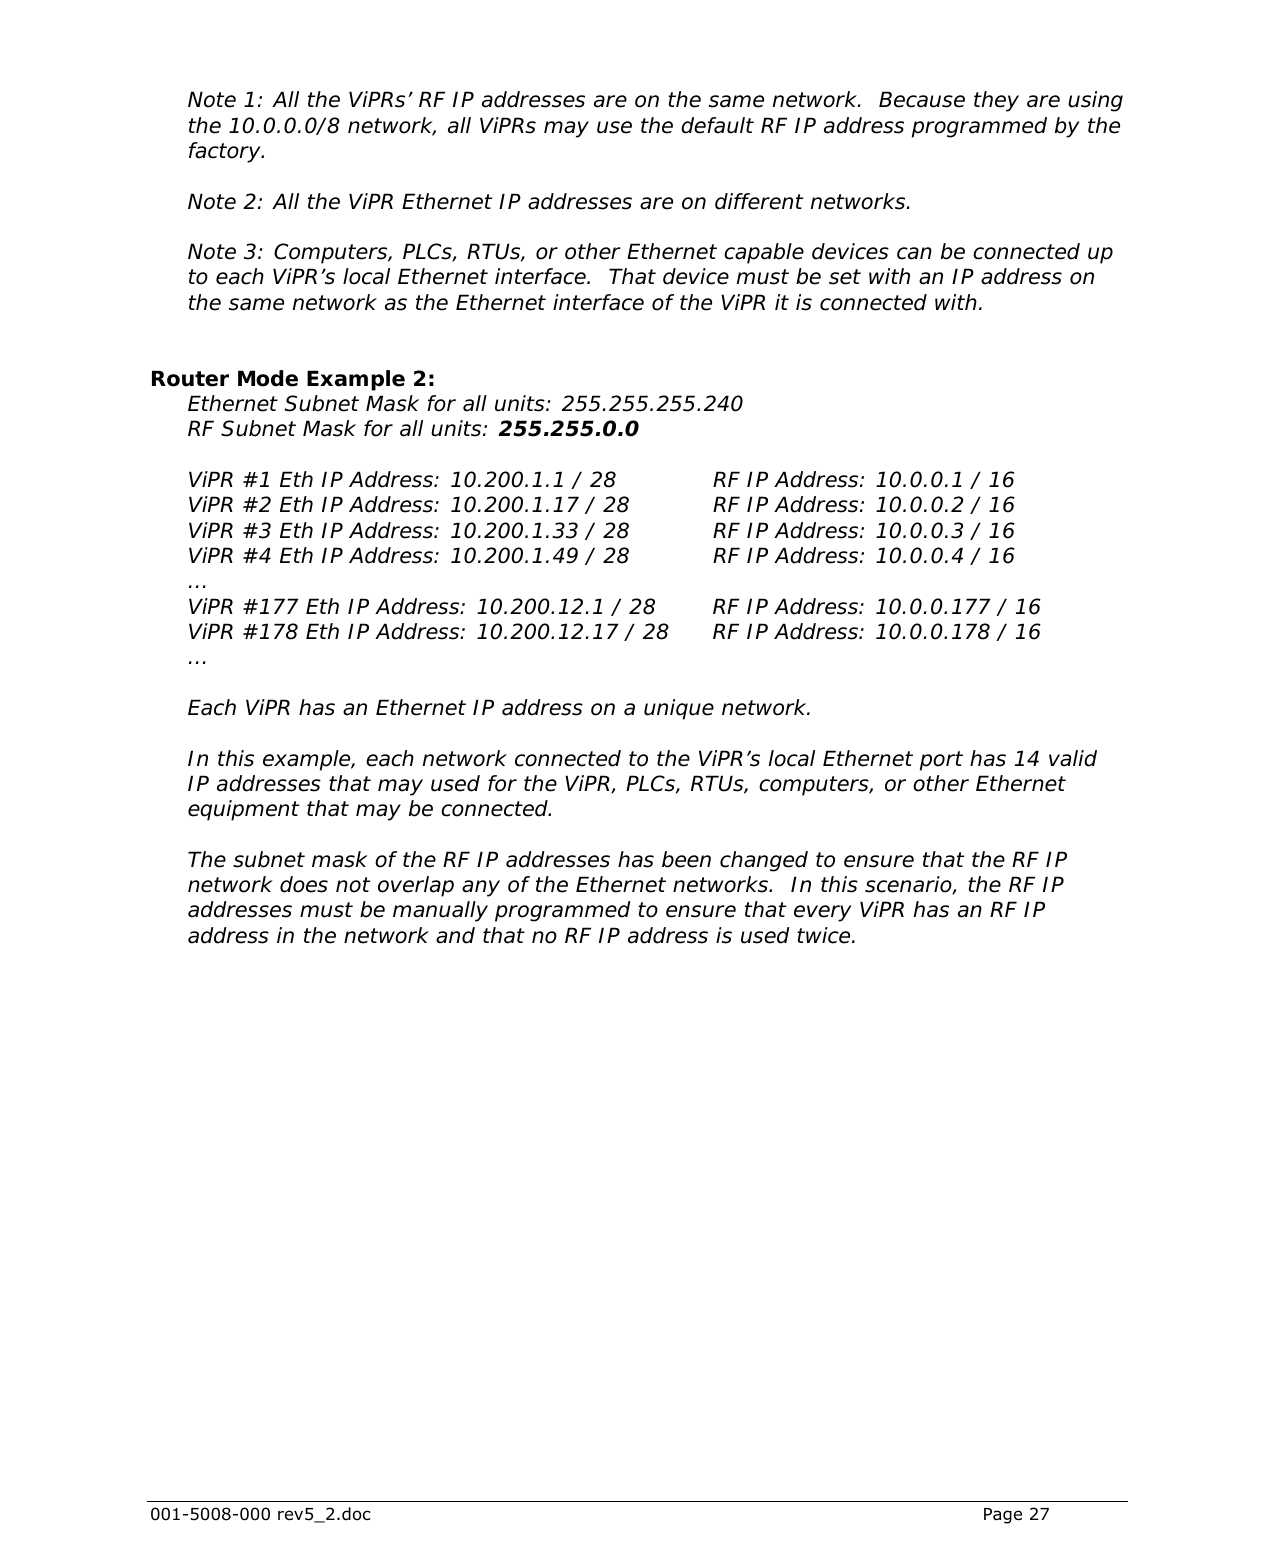  001-5008-000 rev5_2.doc    Page 27  Note 1: All the ViPRs’ RF IP addresses are on the same network.  Because they are using the 10.0.0.0/8 network, all ViPRs may use the default RF IP address programmed by the factory.  Note 2: All the ViPR Ethernet IP addresses are on different networks.  Note 3: Computers, PLCs, RTUs, or other Ethernet capable devices can be connected up to each ViPR’s local Ethernet interface.  That device must be set with an IP address on the same network as the Ethernet interface of the ViPR it is connected with.   Router Mode Example 2:  Ethernet Subnet Mask for all units: 255.255.255.240 RF Subnet Mask for all units: 255.255.0.0  ViPR #1 Eth IP Address: 10.200.1.1 / 28      RF IP Address: 10.0.0.1 / 16 ViPR #2 Eth IP Address: 10.200.1.17 / 28     RF IP Address: 10.0.0.2 / 16 ViPR #3 Eth IP Address: 10.200.1.33 / 28     RF IP Address: 10.0.0.3 / 16 ViPR #4 Eth IP Address: 10.200.1.49 / 28     RF IP Address: 10.0.0.4 / 16 … ViPR #177 Eth IP Address: 10.200.12.1 / 28    RF IP Address: 10.0.0.177 / 16 ViPR #178 Eth IP Address: 10.200.12.17 / 28   RF IP Address: 10.0.0.178 / 16 …  Each ViPR has an Ethernet IP address on a unique network.  In this example, each network connected to the ViPR’s local Ethernet port has 14 valid IP addresses that may used for the ViPR, PLCs, RTUs, computers, or other Ethernet equipment that may be connected.  The subnet mask of the RF IP addresses has been changed to ensure that the RF IP network does not overlap any of the Ethernet networks.  In this scenario, the RF IP addresses must be manually programmed to ensure that every ViPR has an RF IP address in the network and that no RF IP address is used twice.